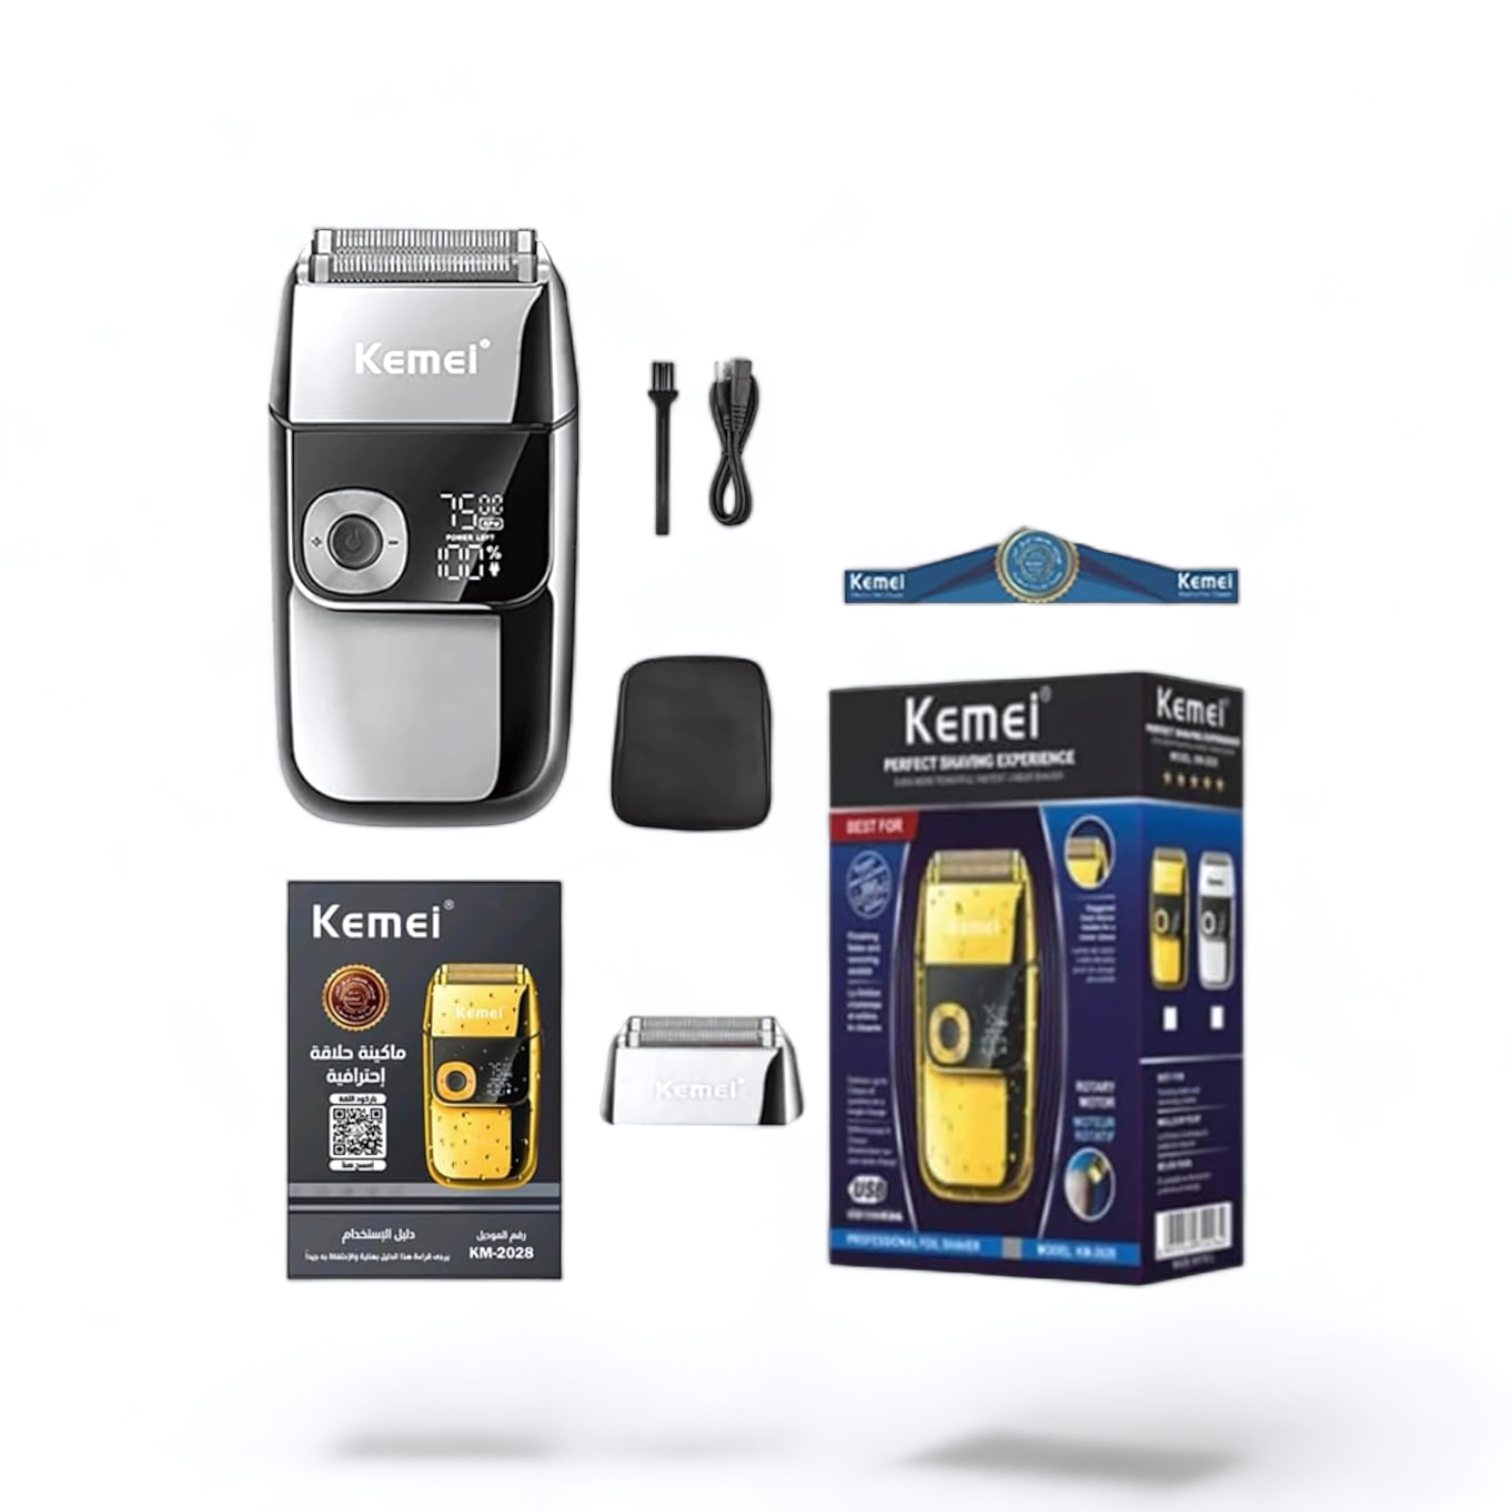 KEMEI KM-2028 Barber Professional Beard Hair Shaver - Electric Razor with LCD Display for Effortless Grooming